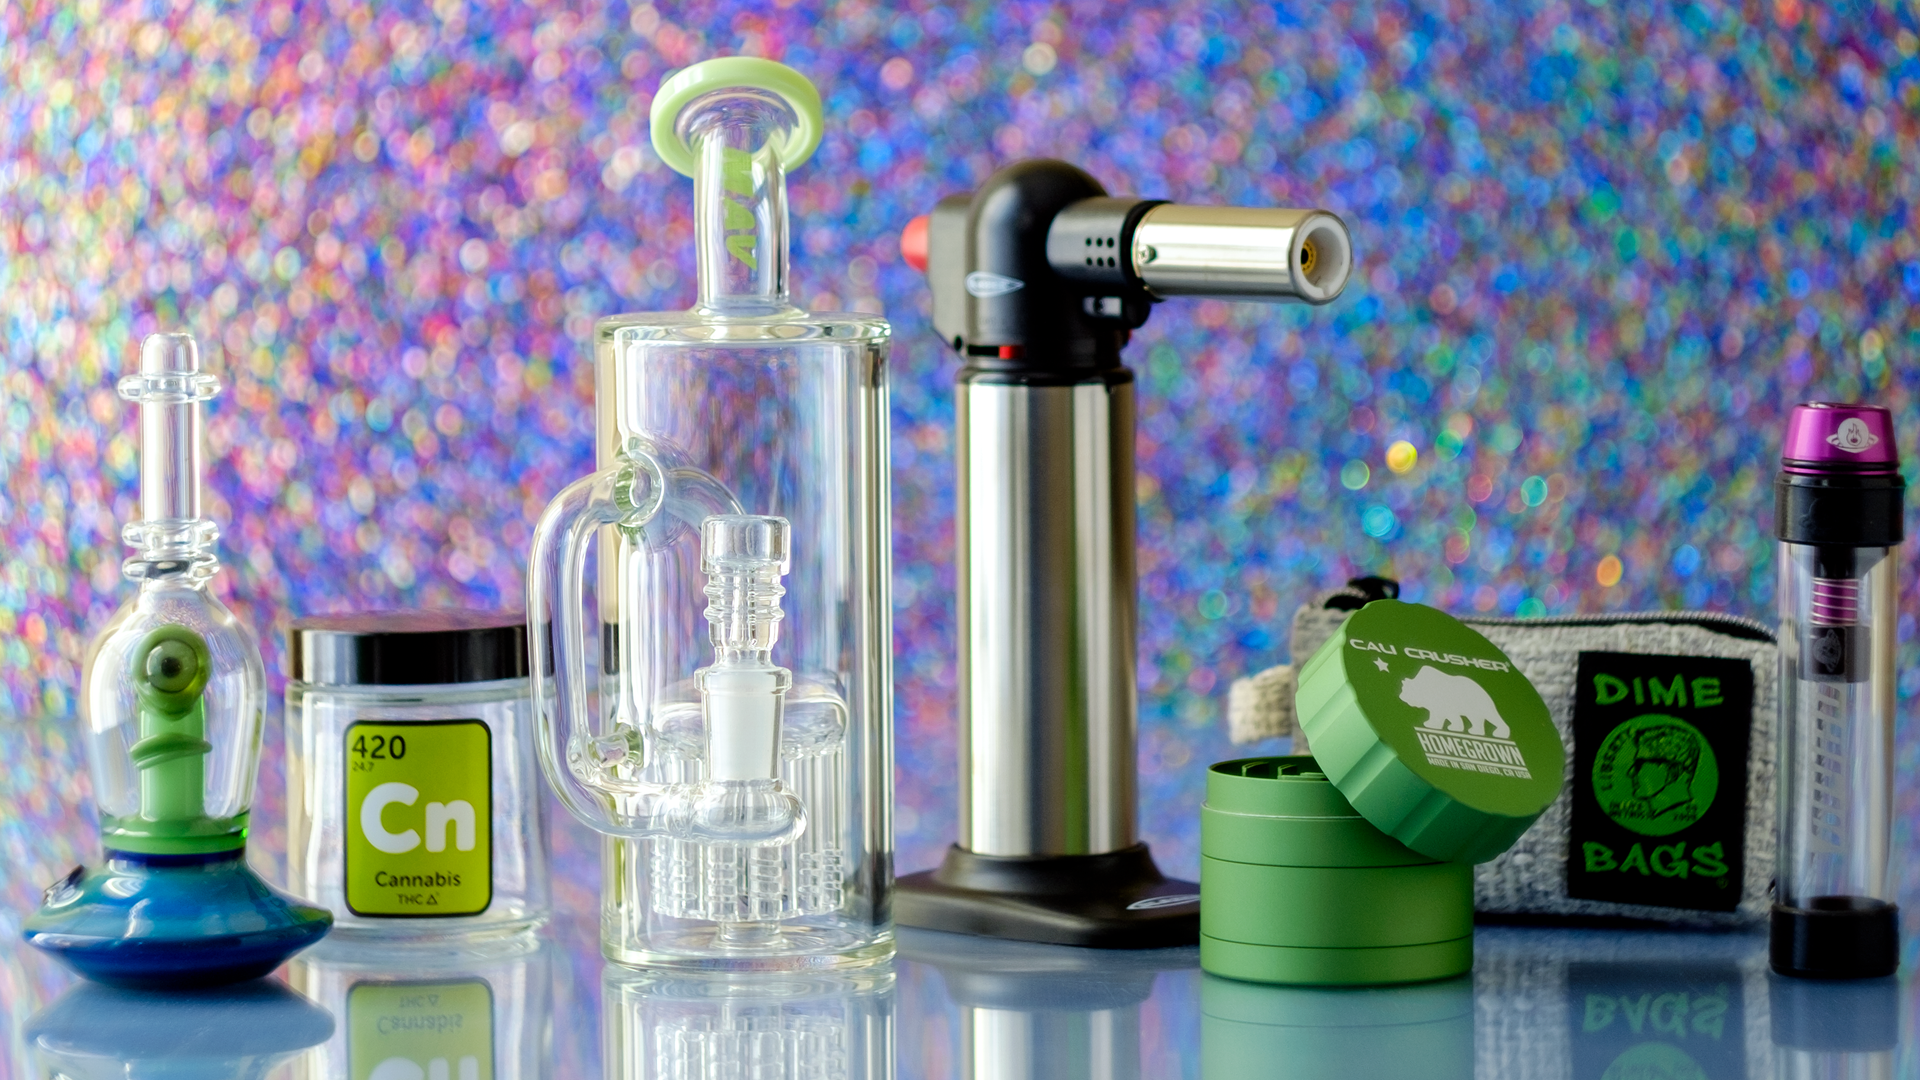 420 Science, the Best Online Headshop - 420 Science